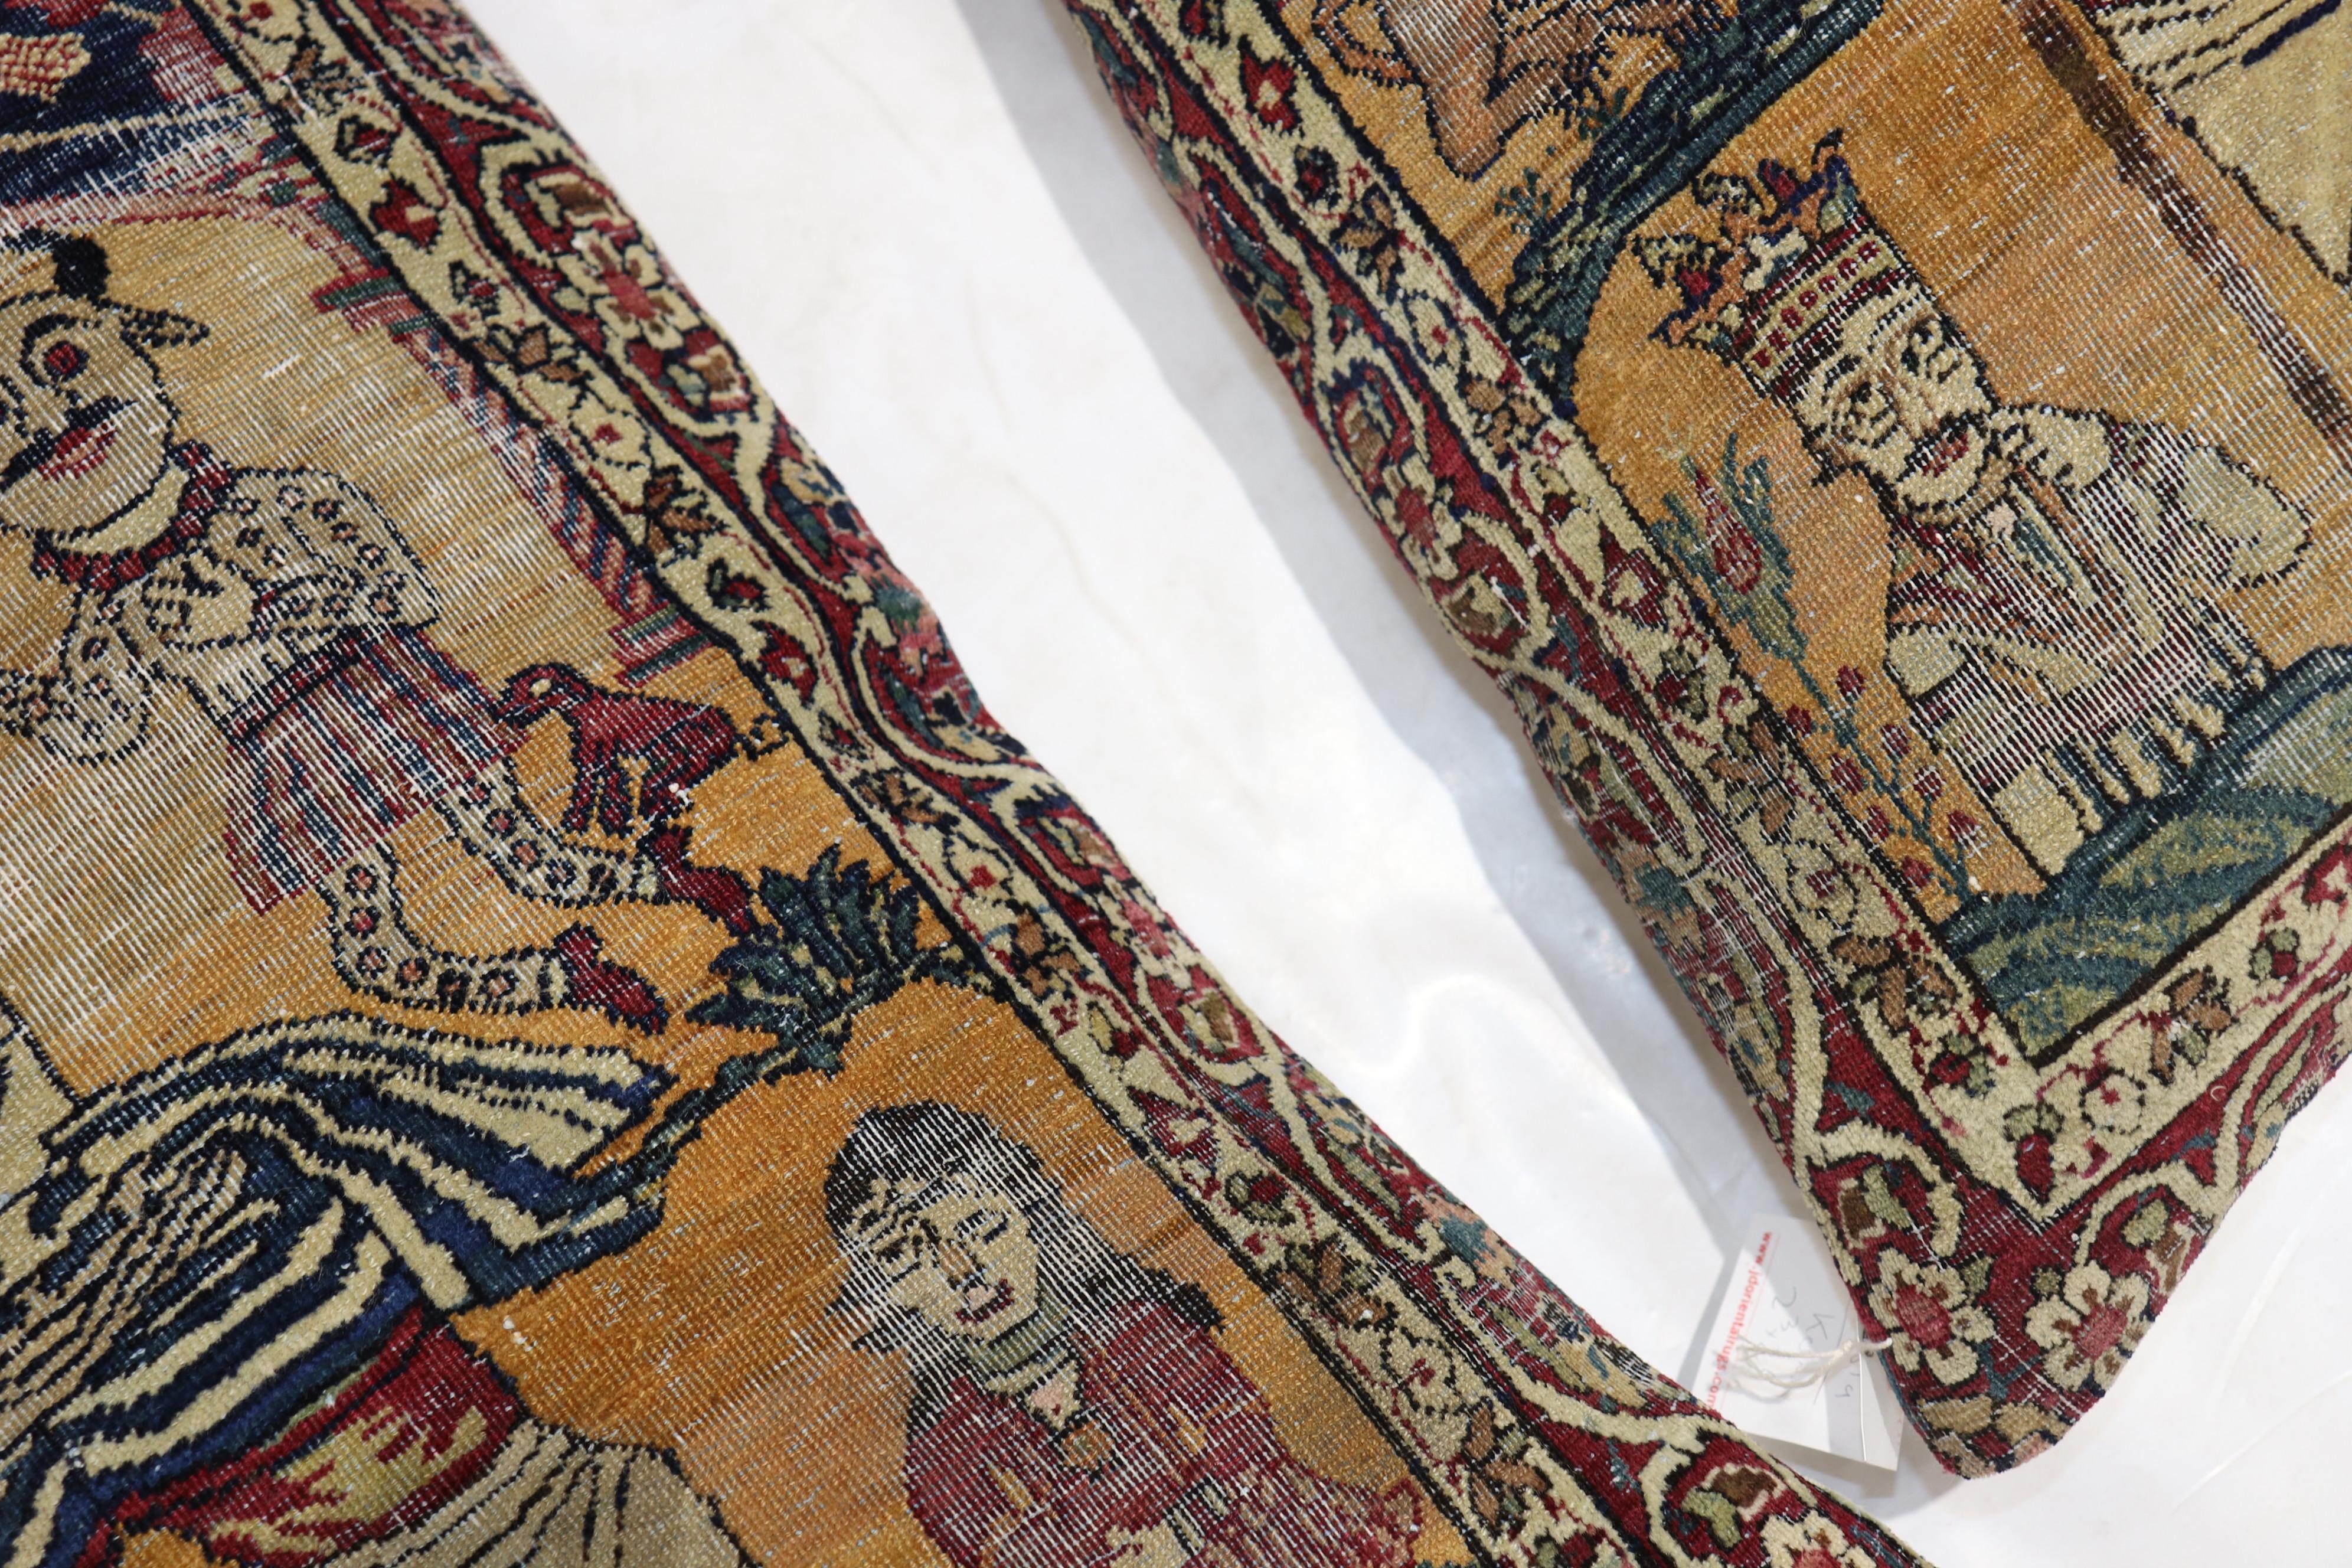 Set of pillows made from a 19th century Persian Lavar Kerman Pictorial rug. Each pillow has a polyfill insert and zipper closure

Both measure 27'' x 30'' & 27'' x 32'' respectively.